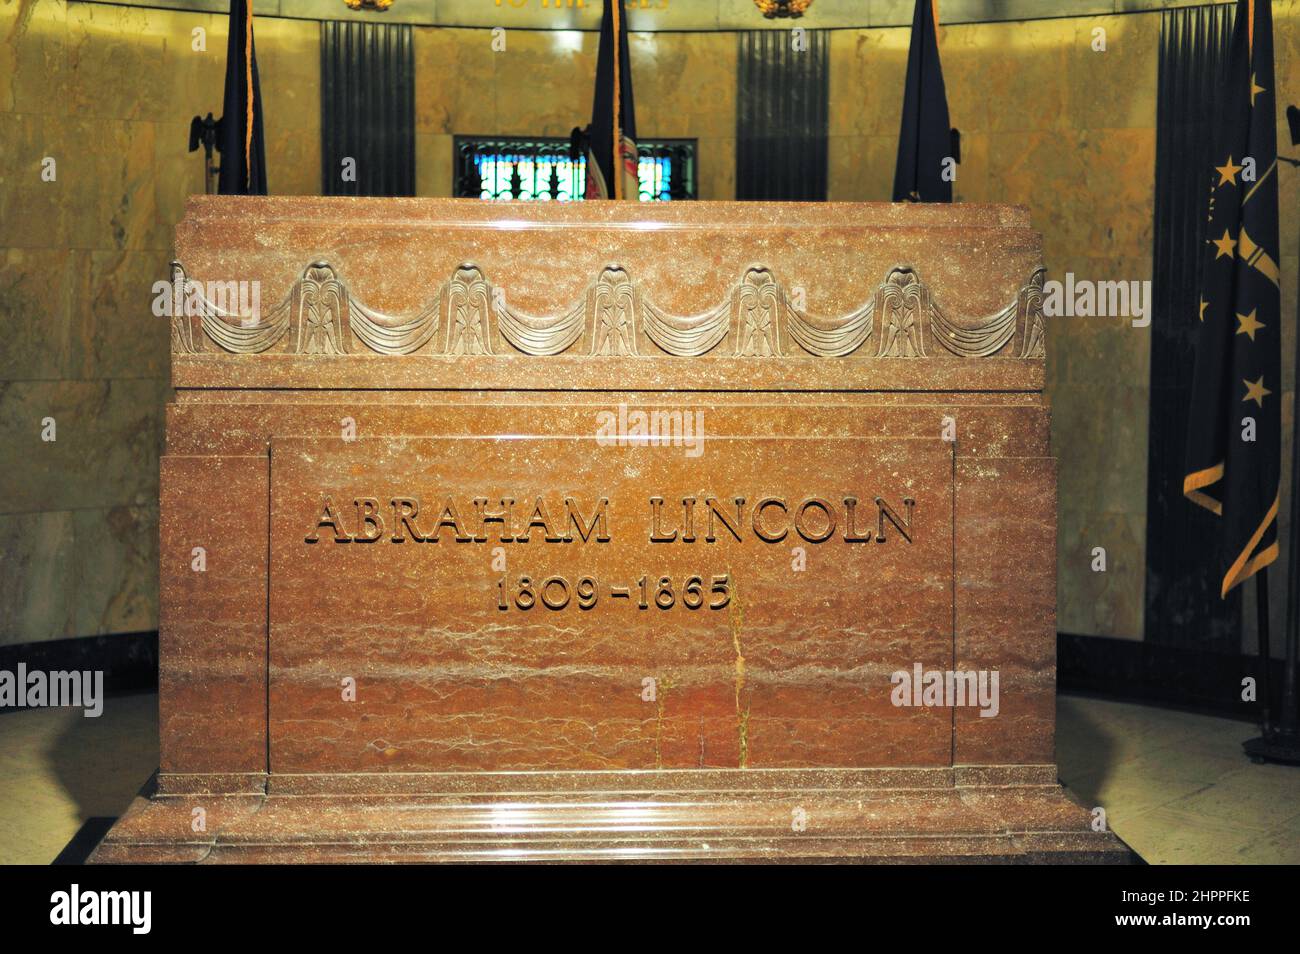 Springfield, Illinois, USA. Abraham Lincoln's tomb site, the final resting place of Abraham Lincoln at Lincoln's Tomb. Stock Photo